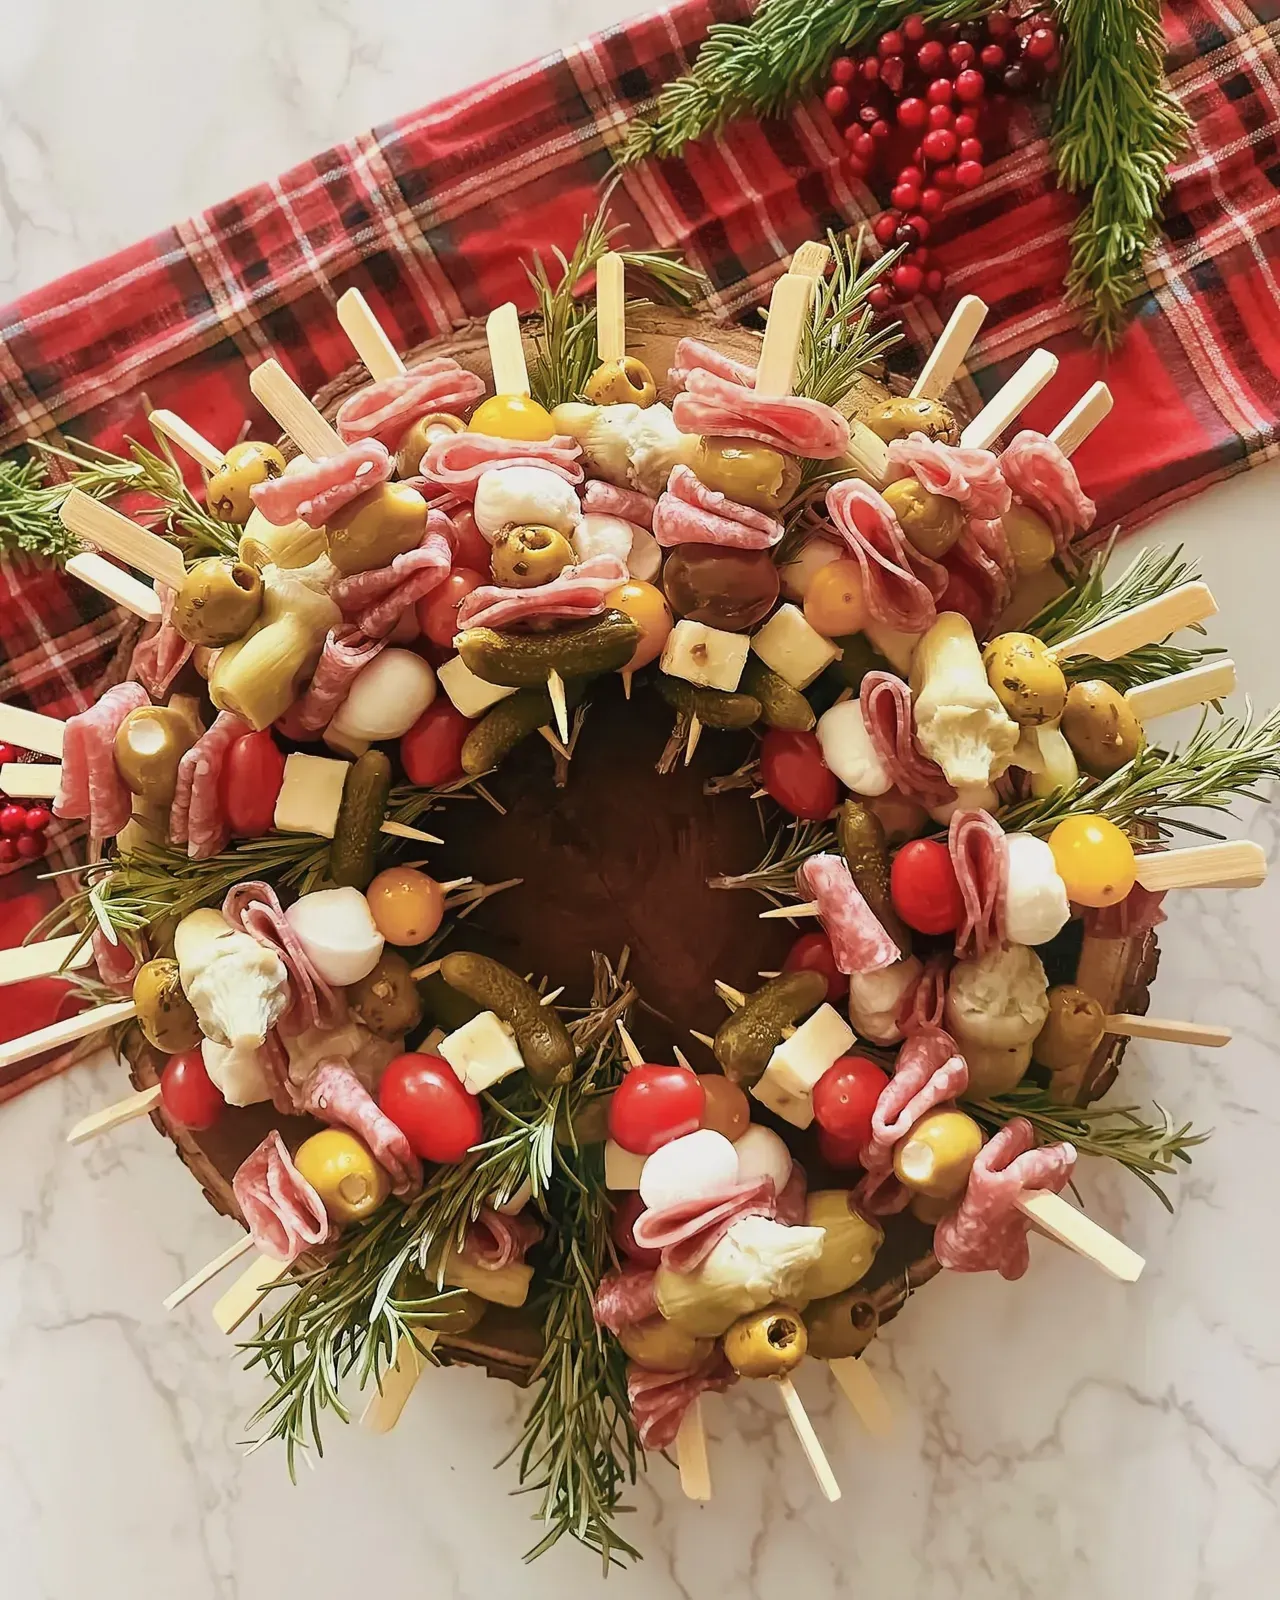 Charcuterie skewer wreath with a variety of ingredients